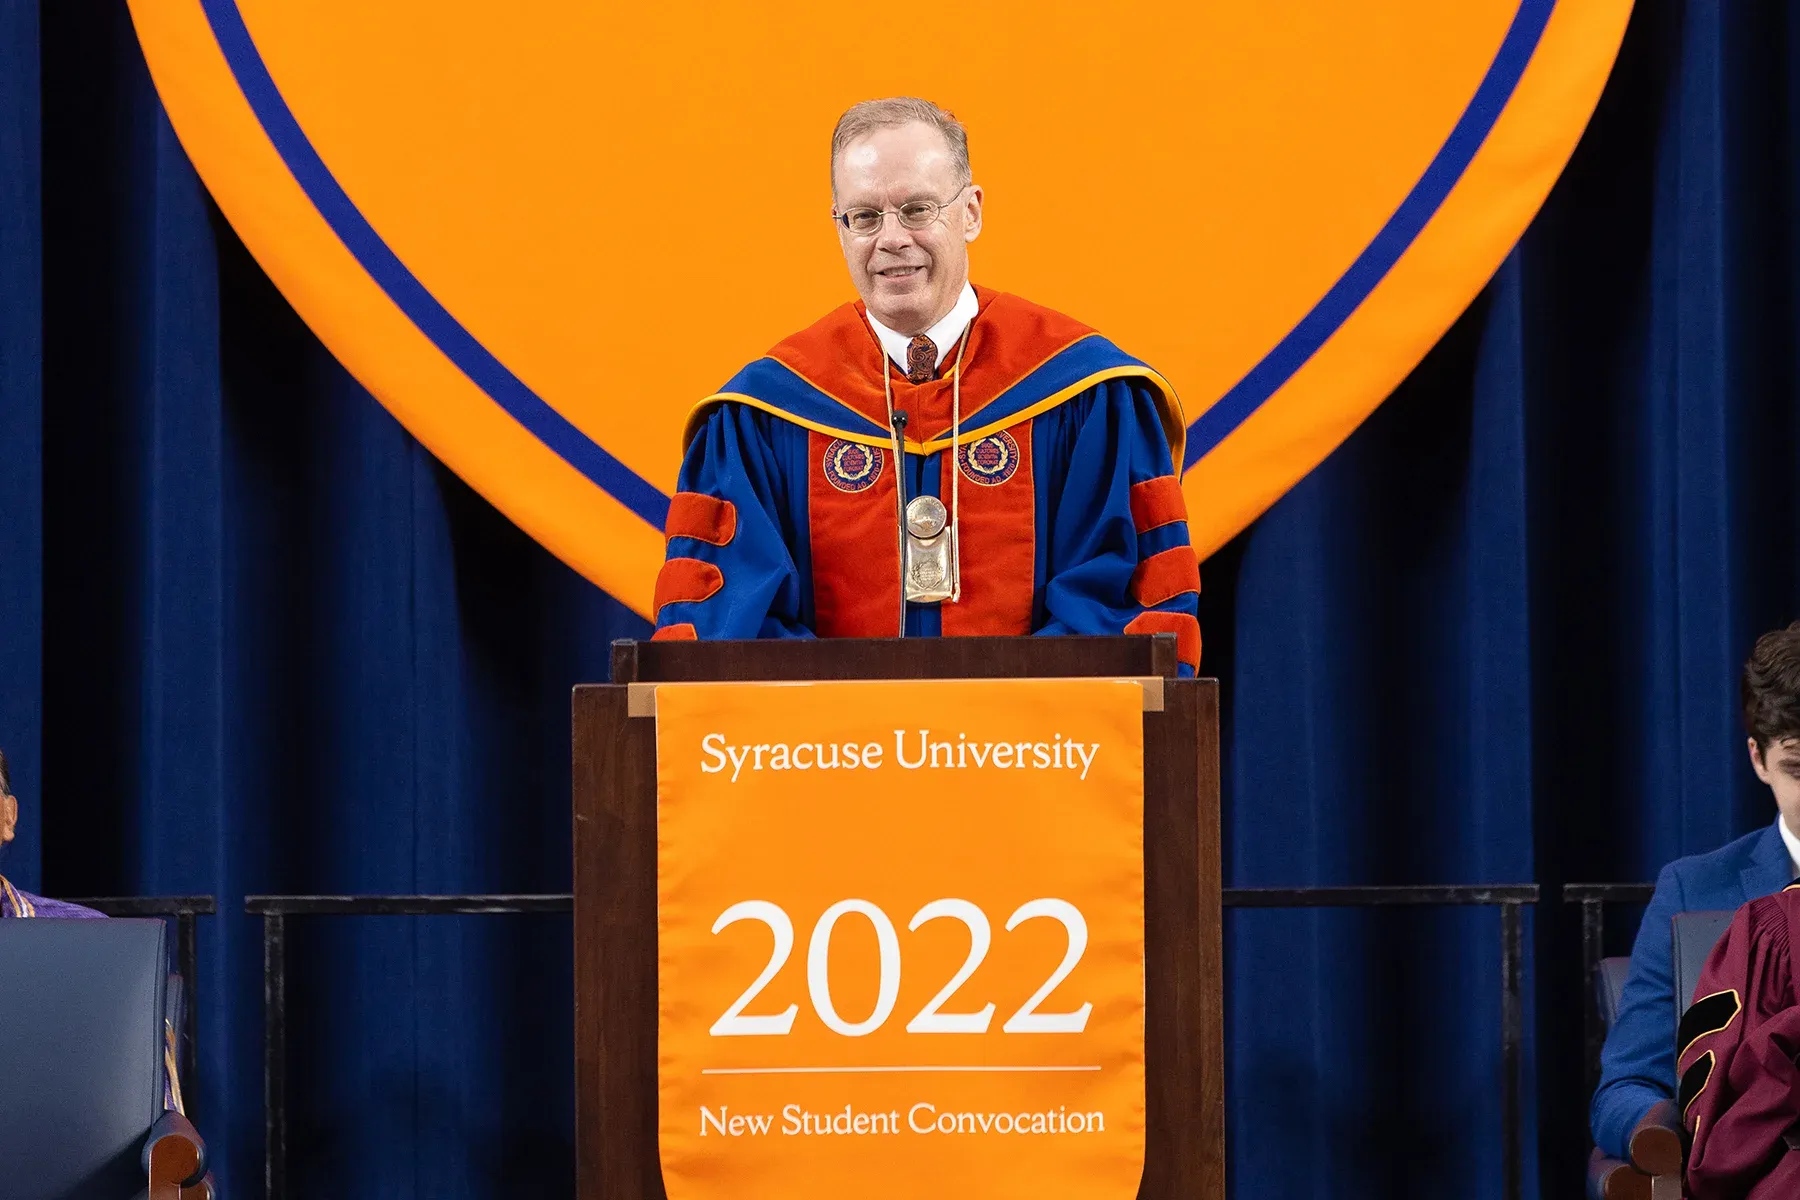 Chancellor Kent Syverud stands behind a podium speaking to the convocation crowd.